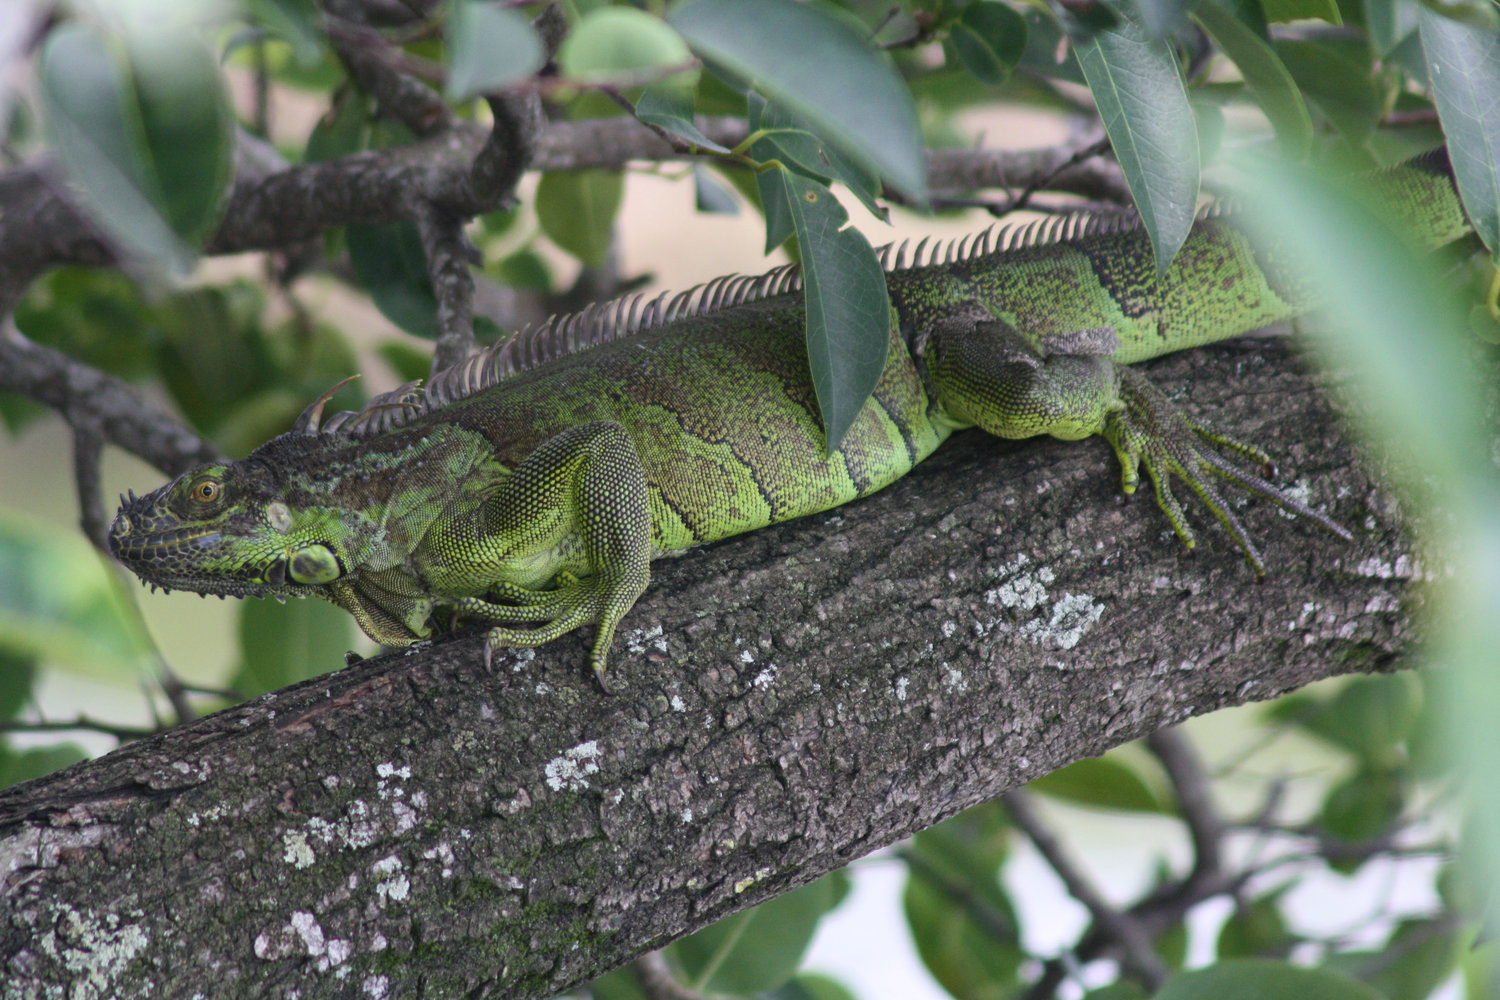 Pictured is a green iguana.